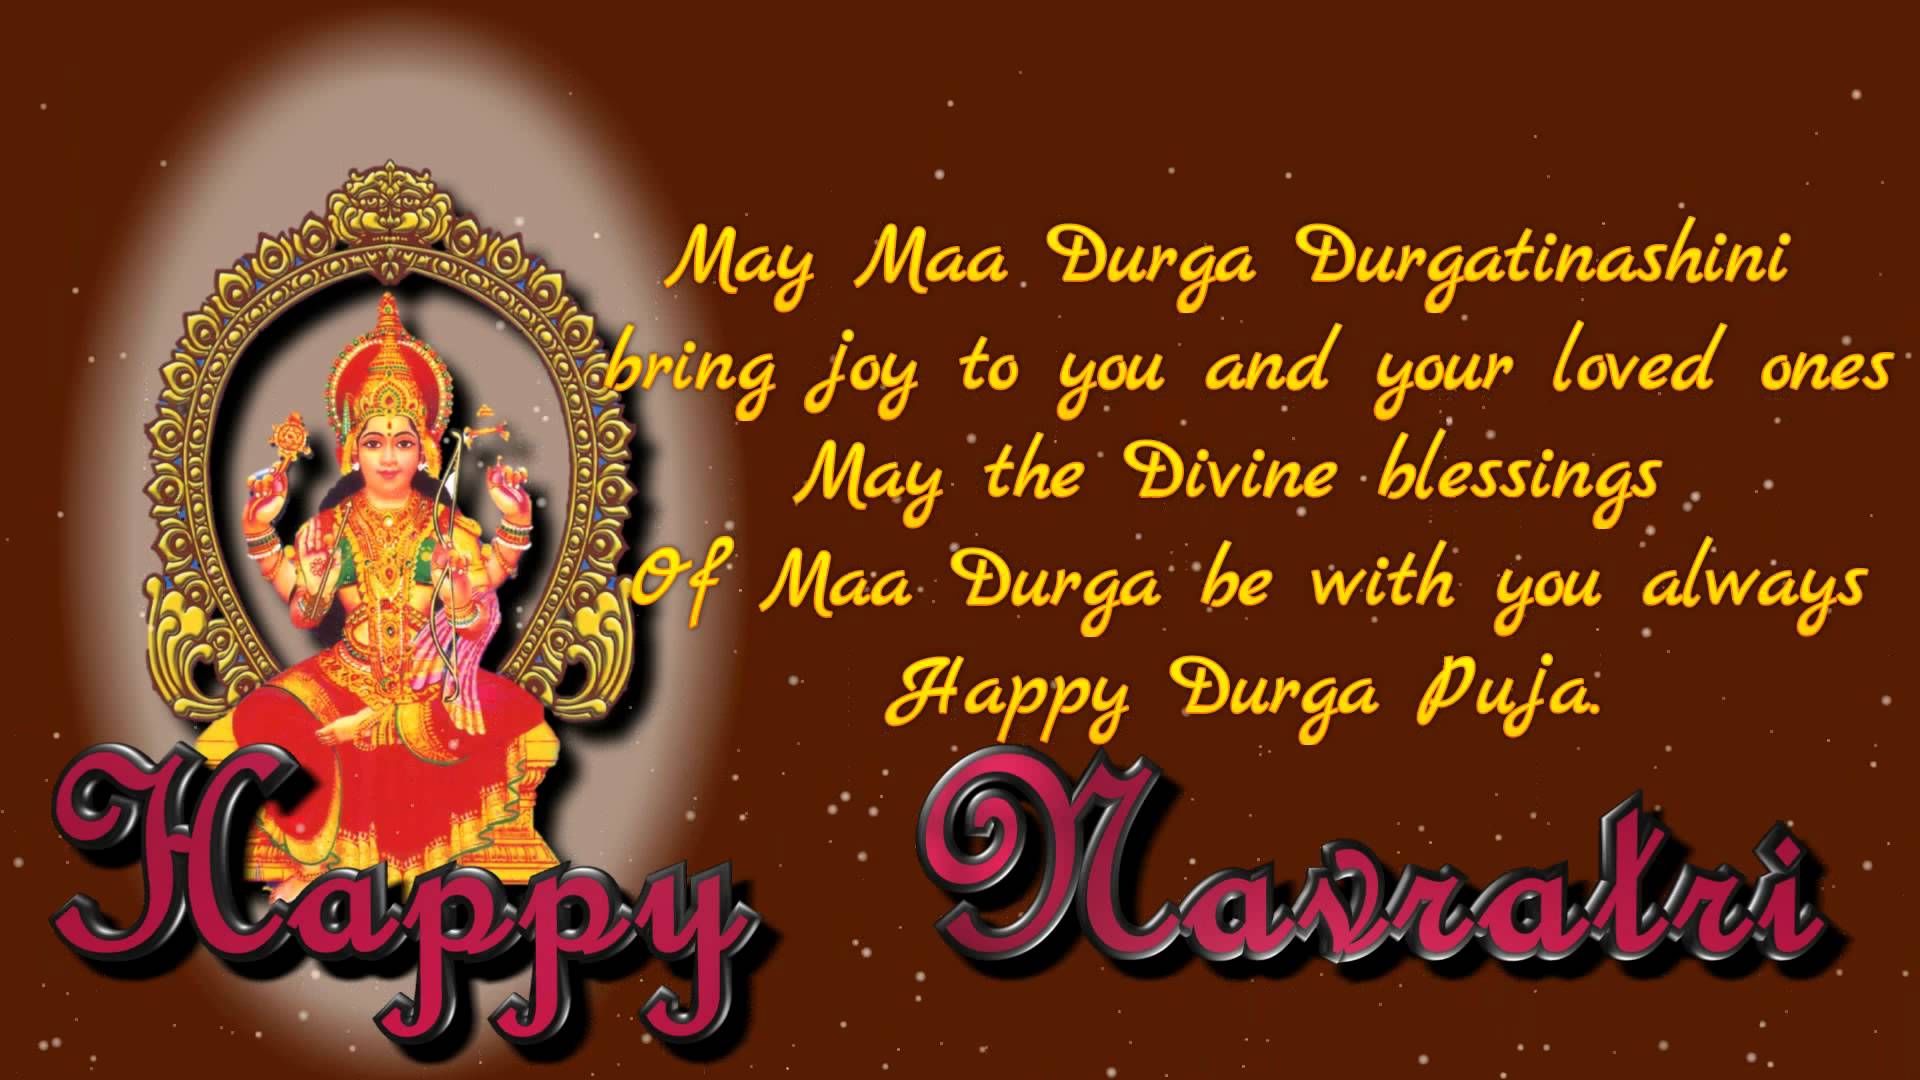 Happy Navratri Advance Wishes Greeting Cards, Ecards, Images & Pictures in English